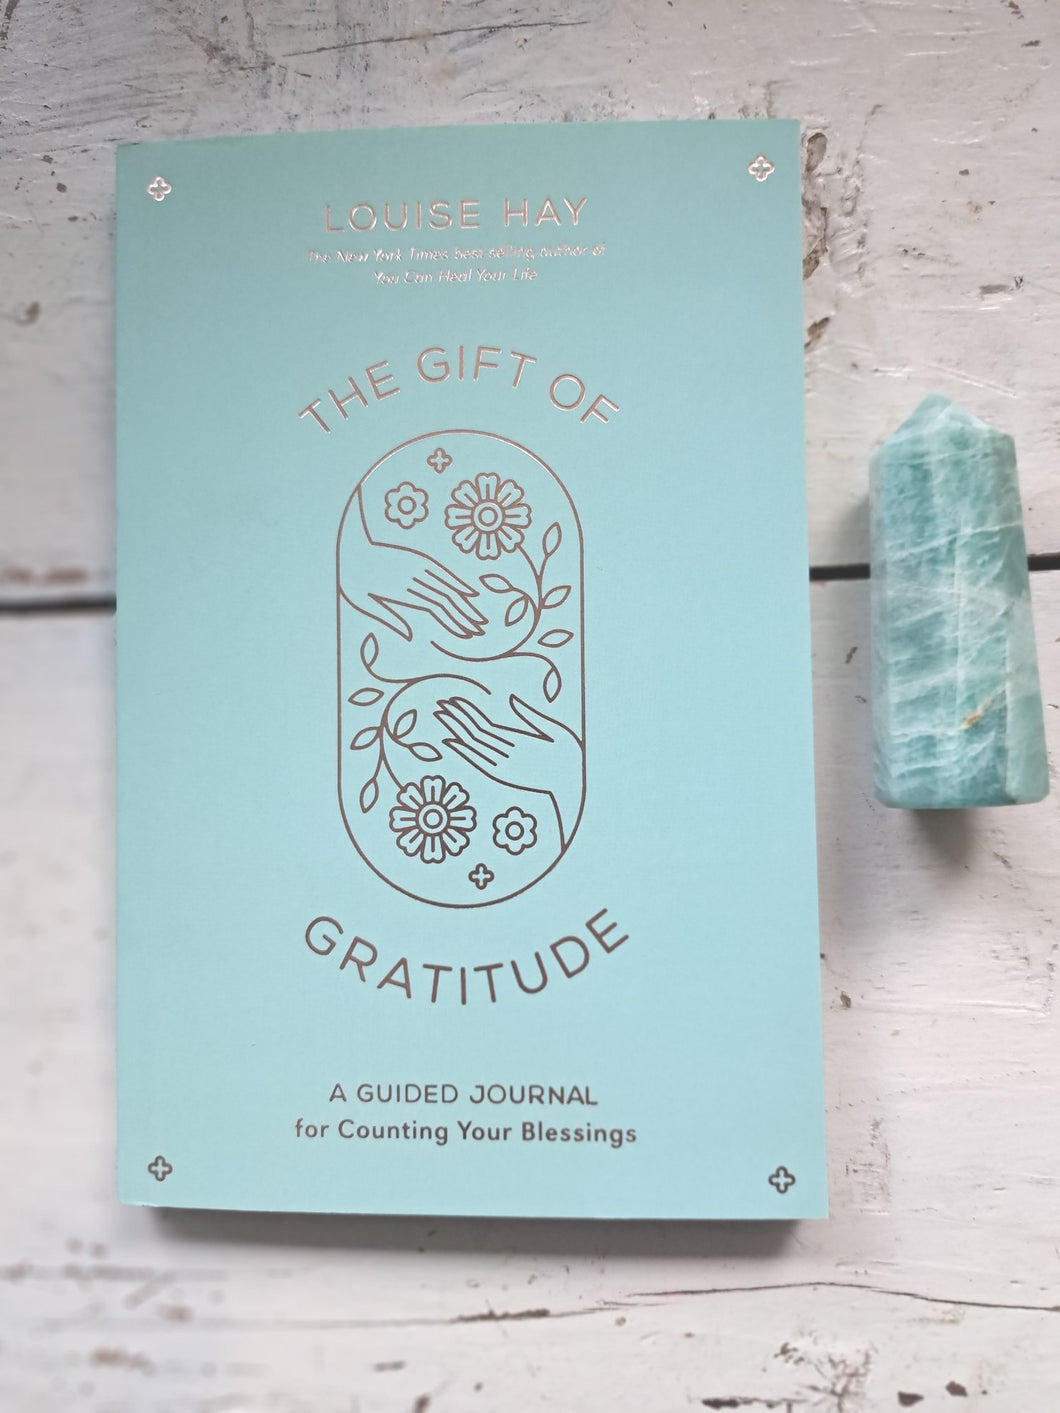 Louise hay The Gift of Gratitude: A Guided Journal for Counting Your Blessings